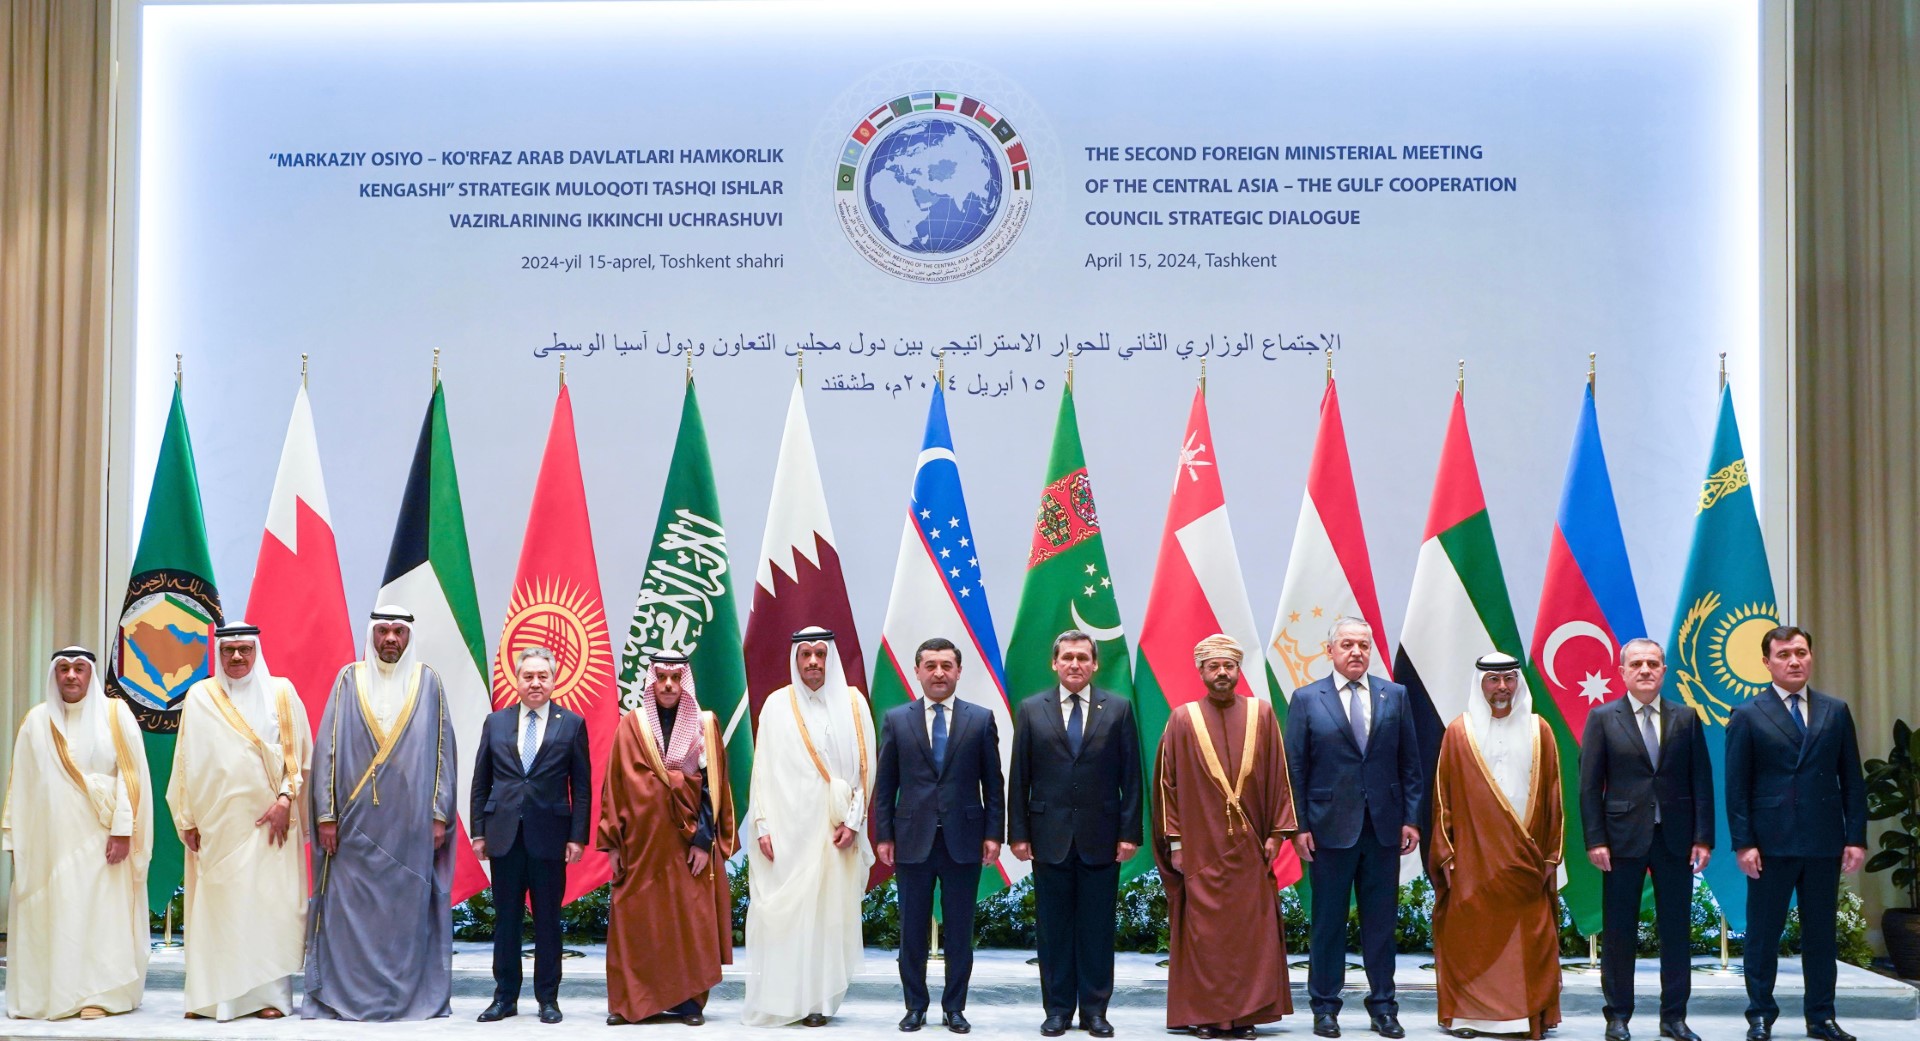 Kuwait's Foreign Minister Abdullah Ali Al-Yahya heads delegation to GCC, Central Asia meeting